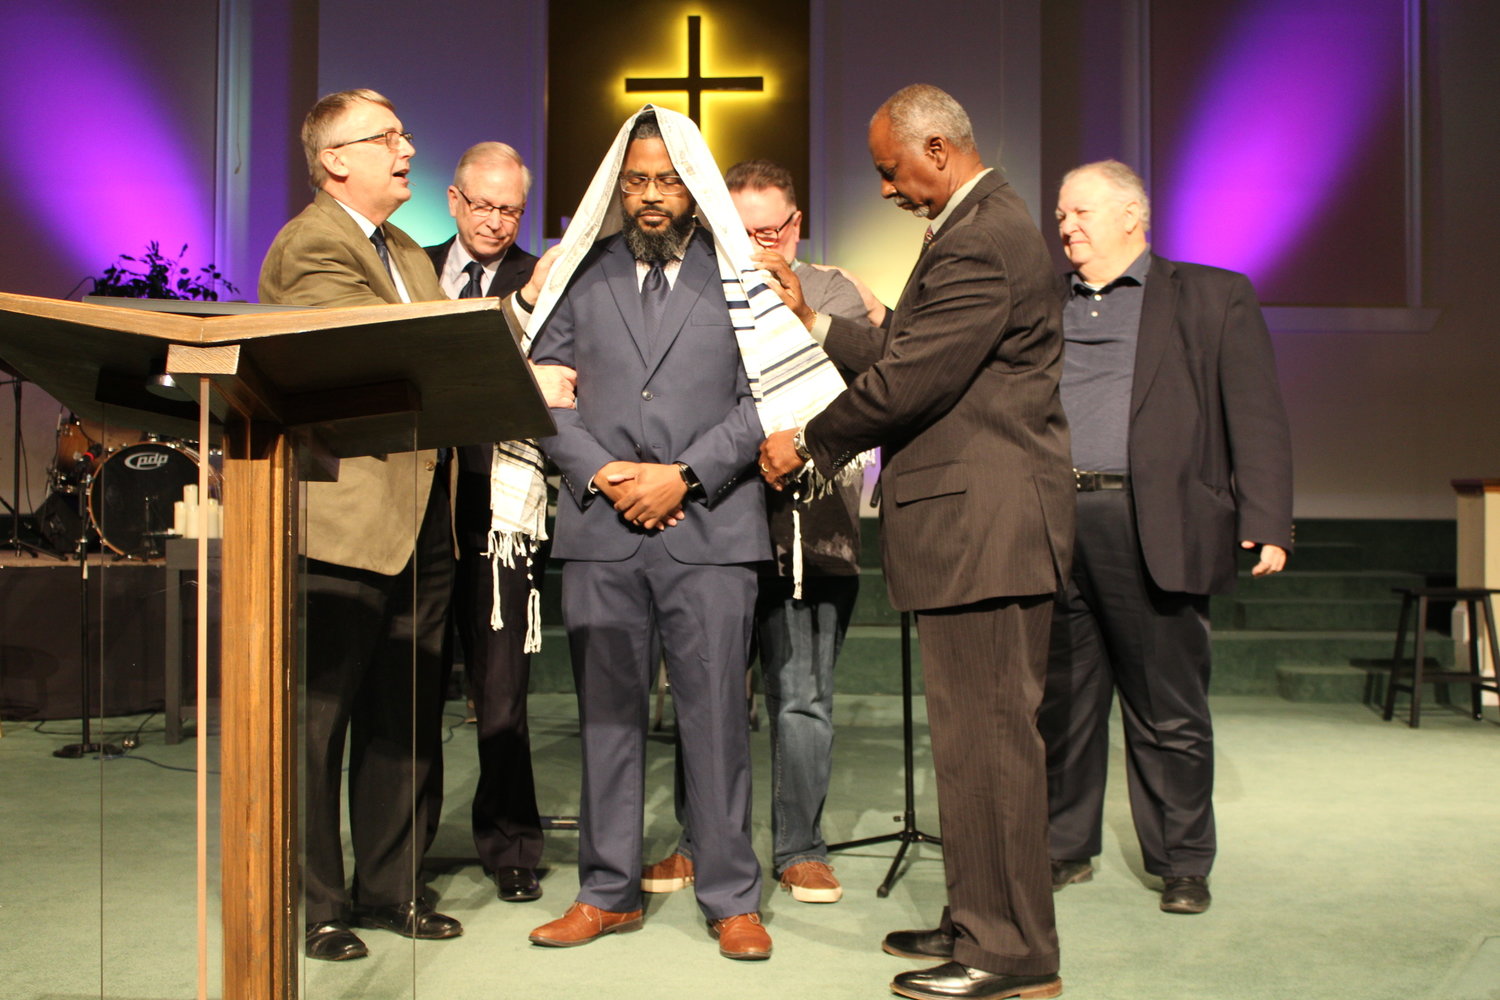 Retiring Liberty Pastor Randy Wood (left) passes the prayer shawl or mantel on to new pastor James Oney (center) with the help of Deacon Chairman George Smith.